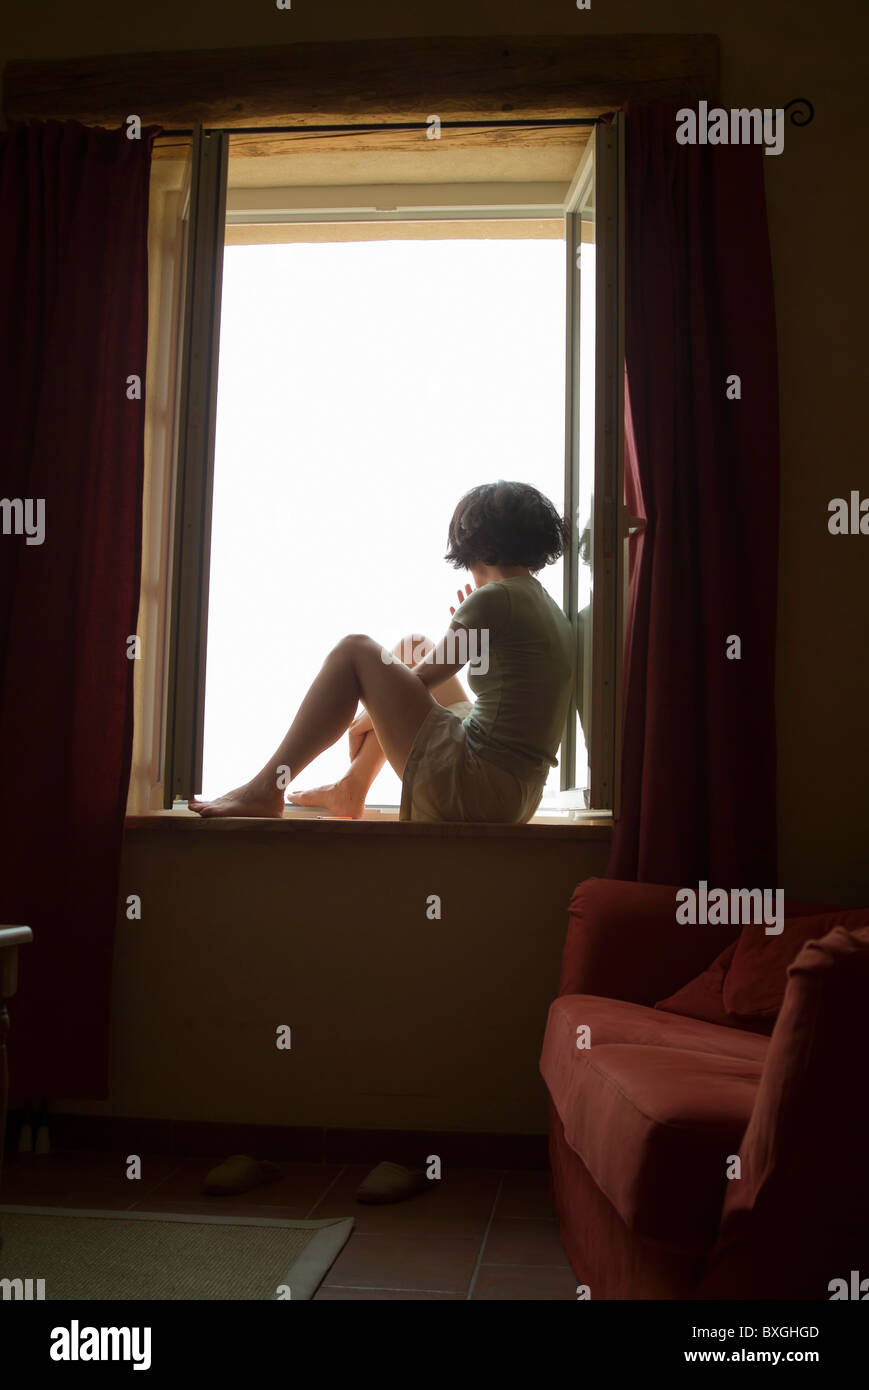 Woman silhouette sitting on her bedroom windowsill looking out and daydreaming Stock Photo